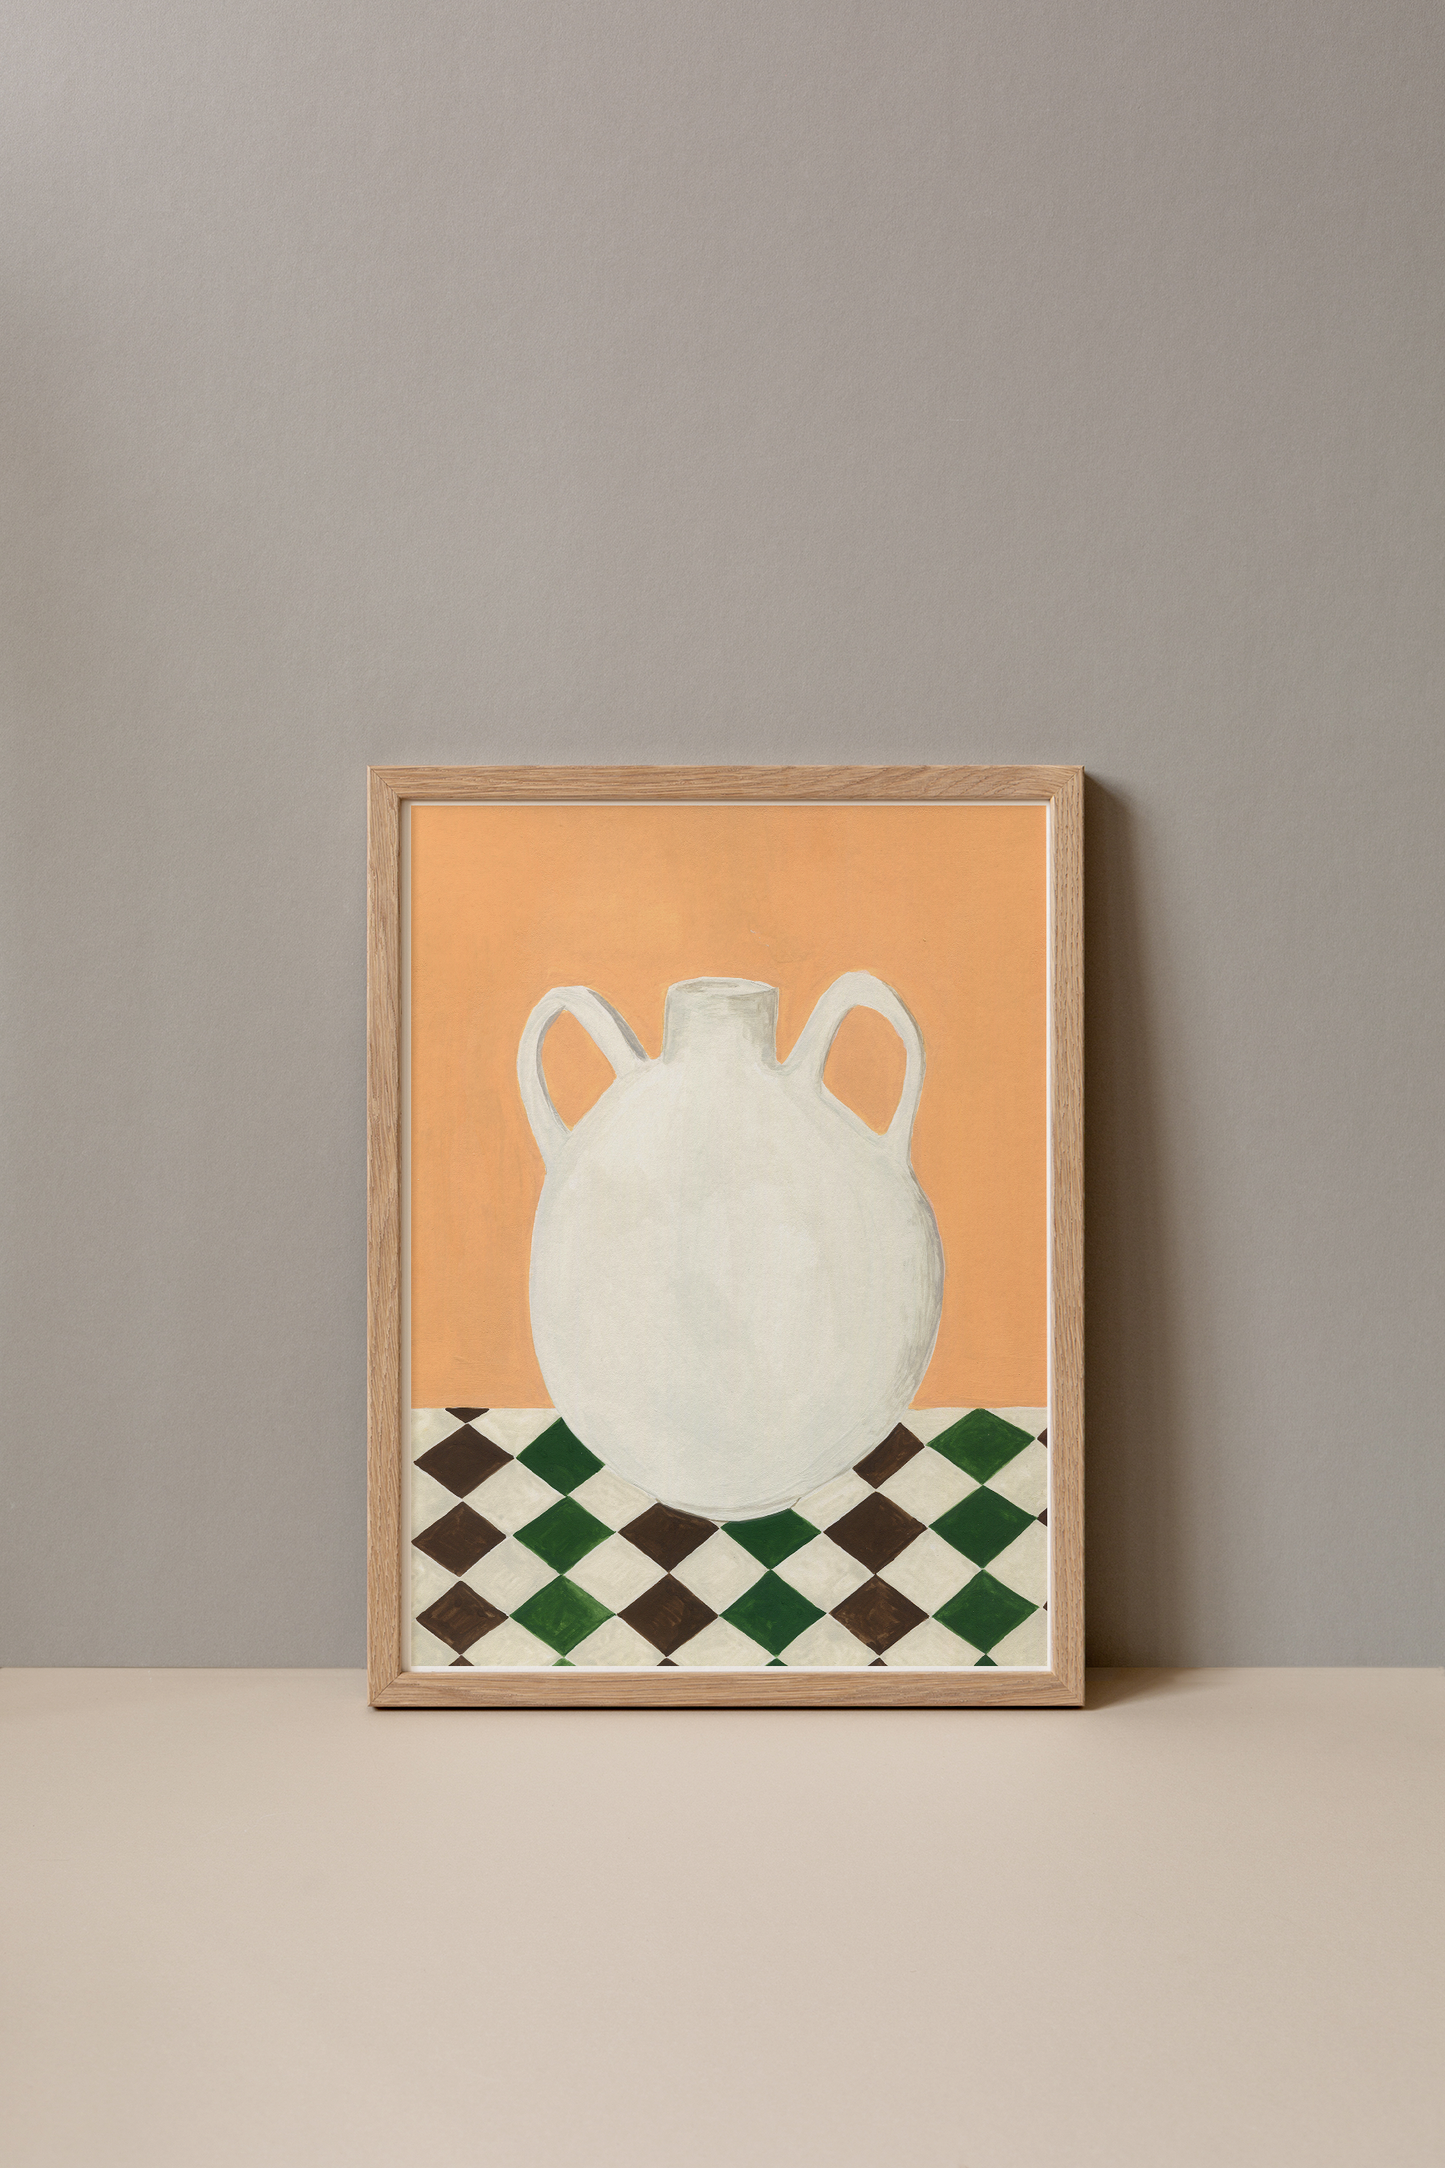 Checkers and Vase